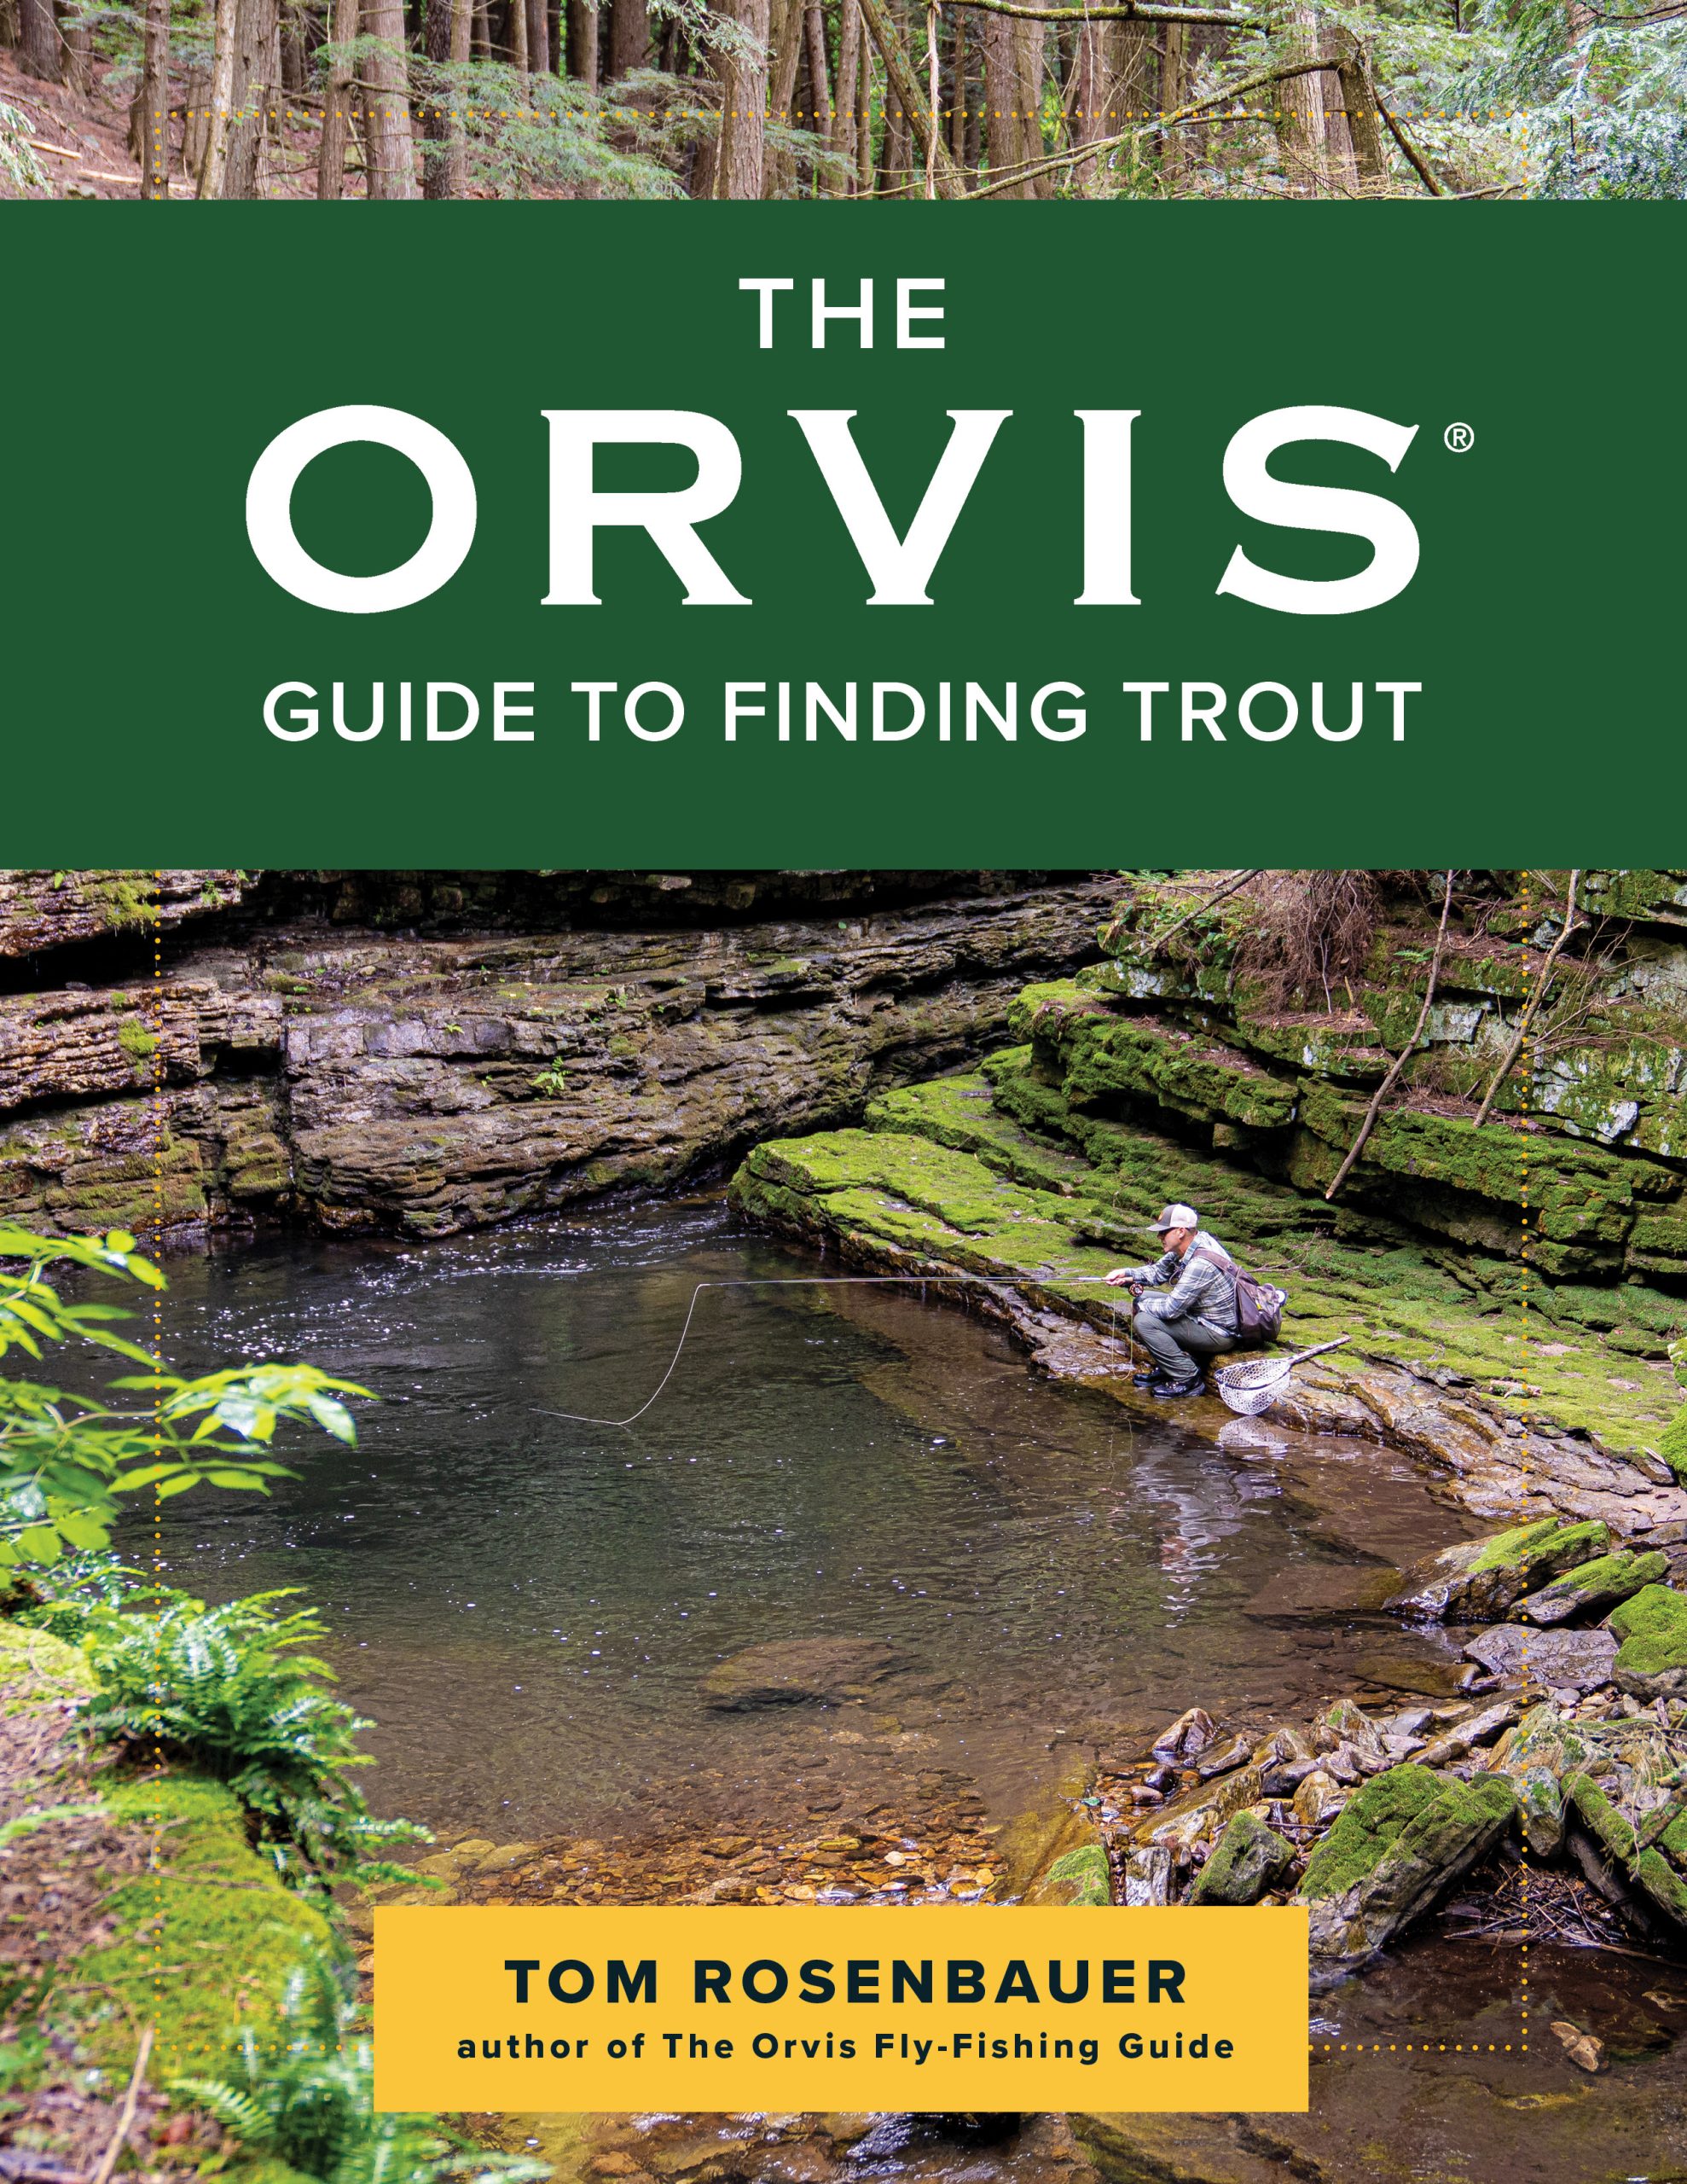 Book Excerpt: The Orvis Guide to Finding Trout